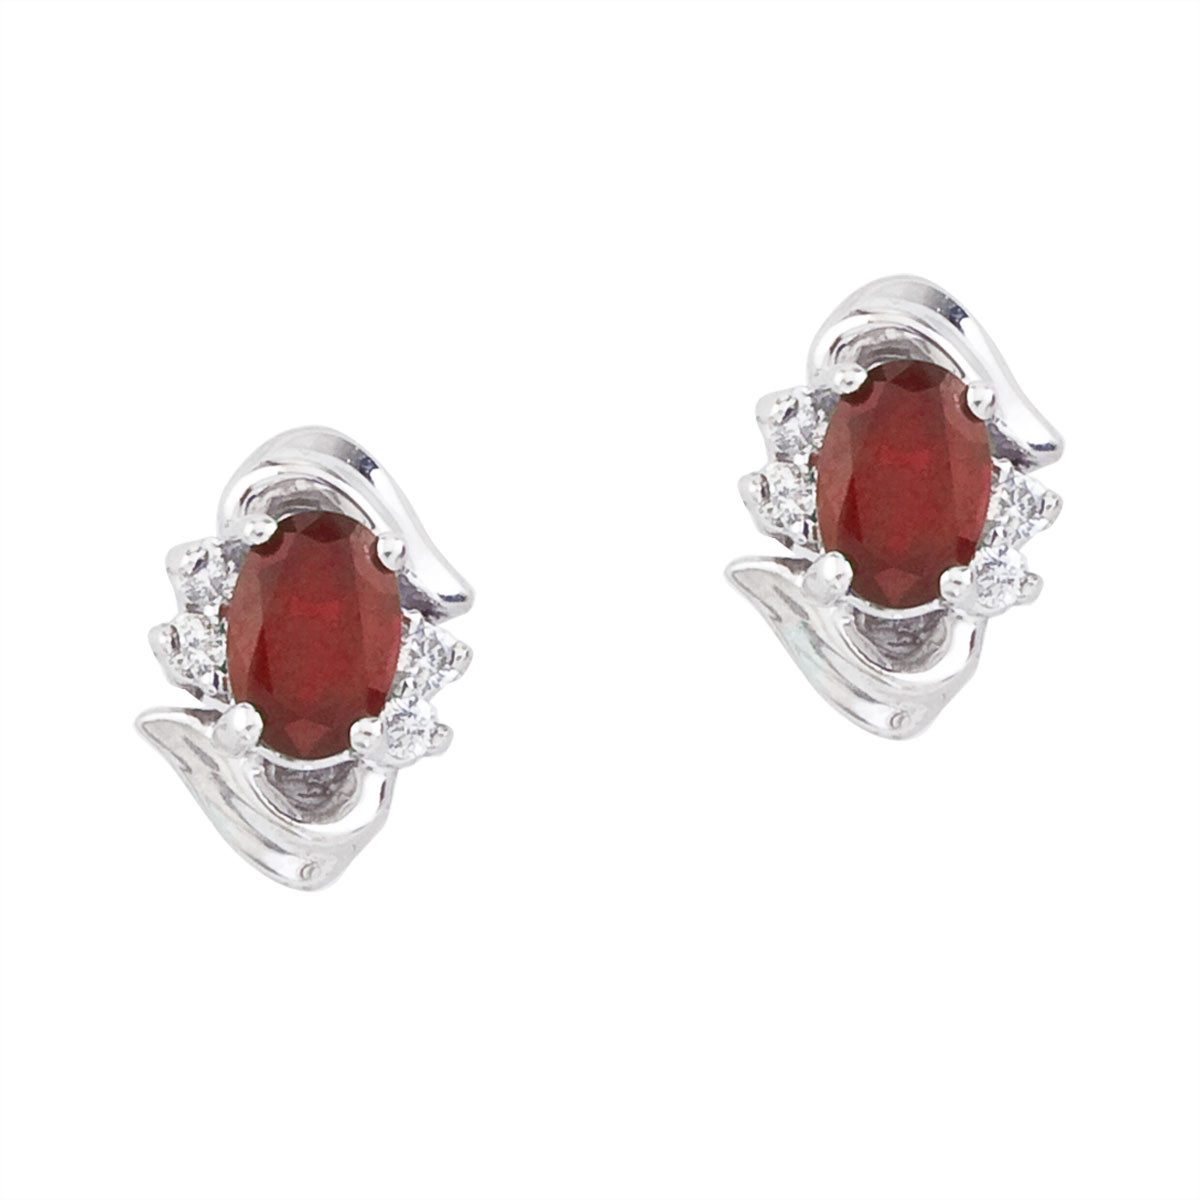 JCX2312: Stunning 14k white gold and ruby earrings. Featuring natural 6x4 mm oval rubies and .11 total carat diamonds.